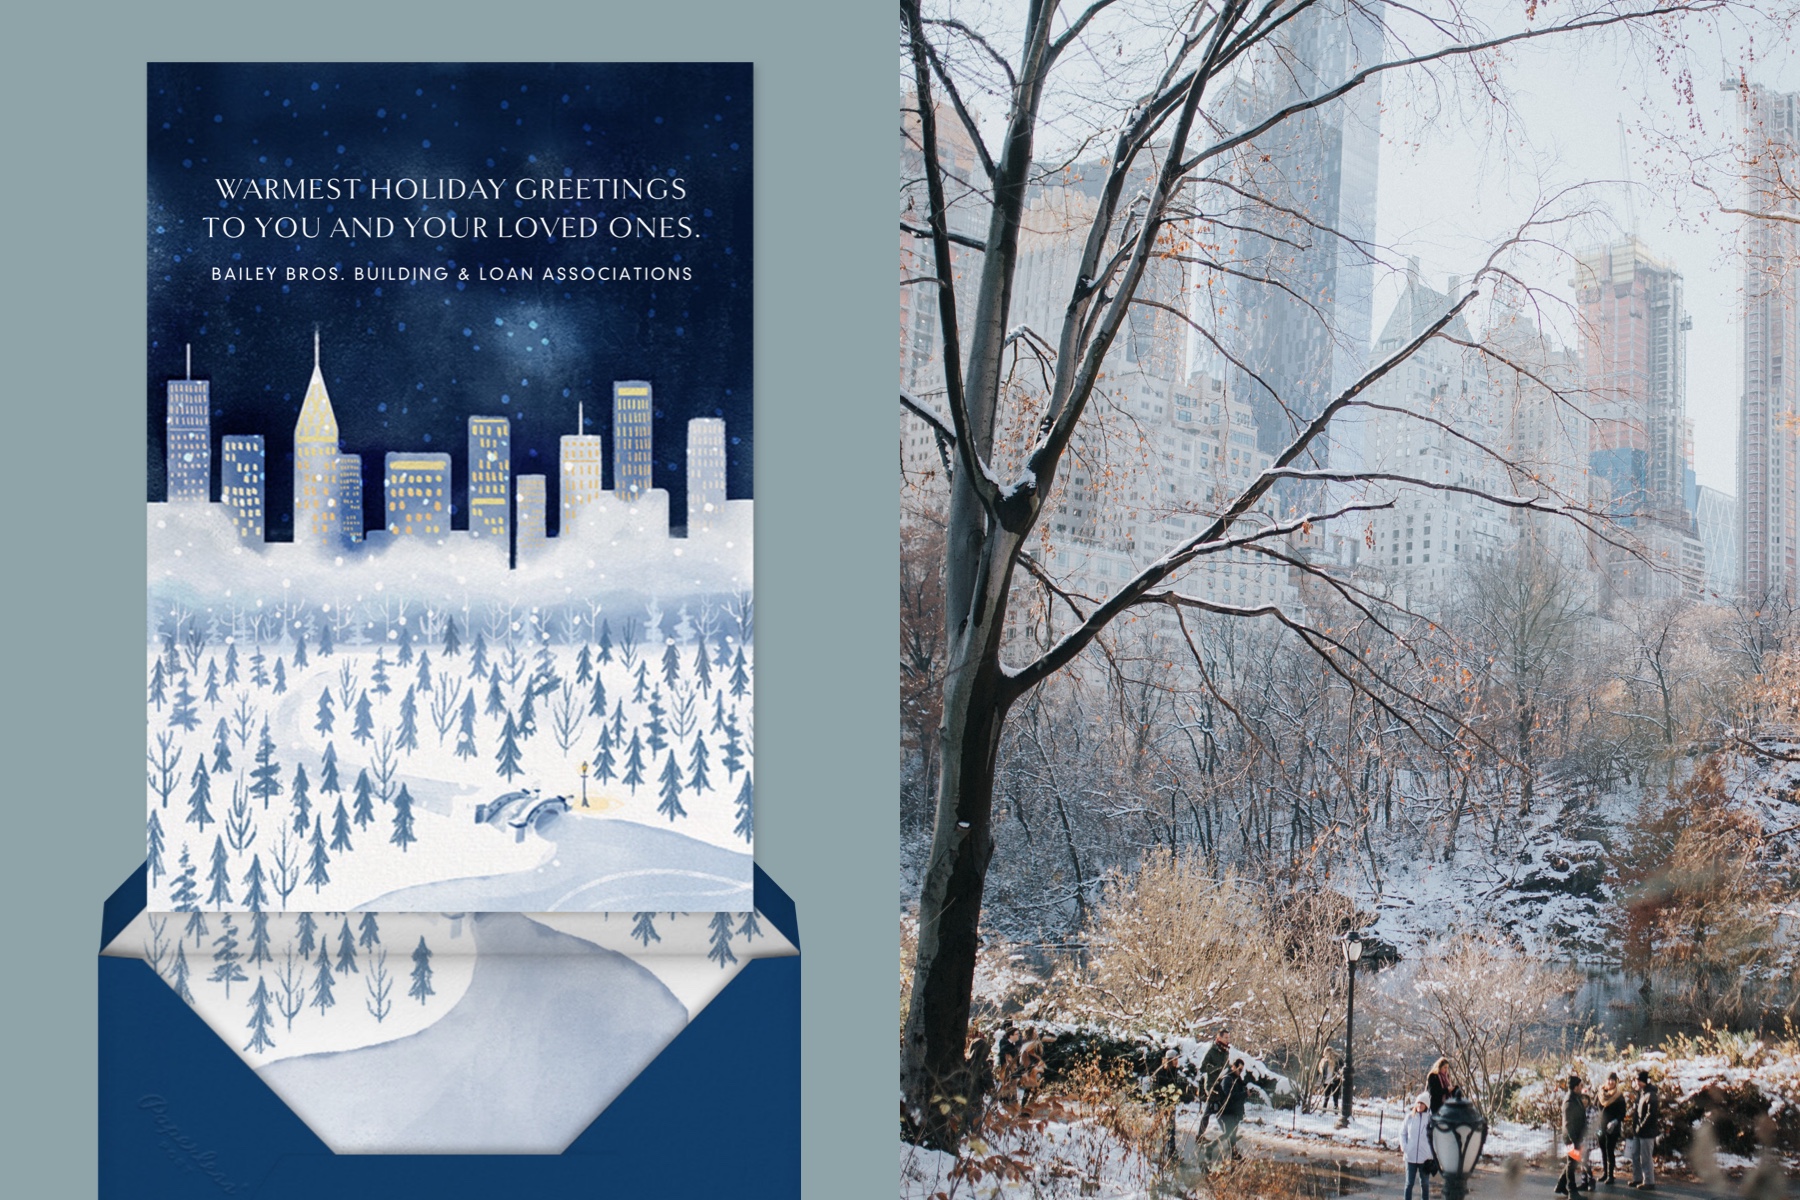 Left: Digital invitation with a snowy city scene. | Right: New York City in the winter.